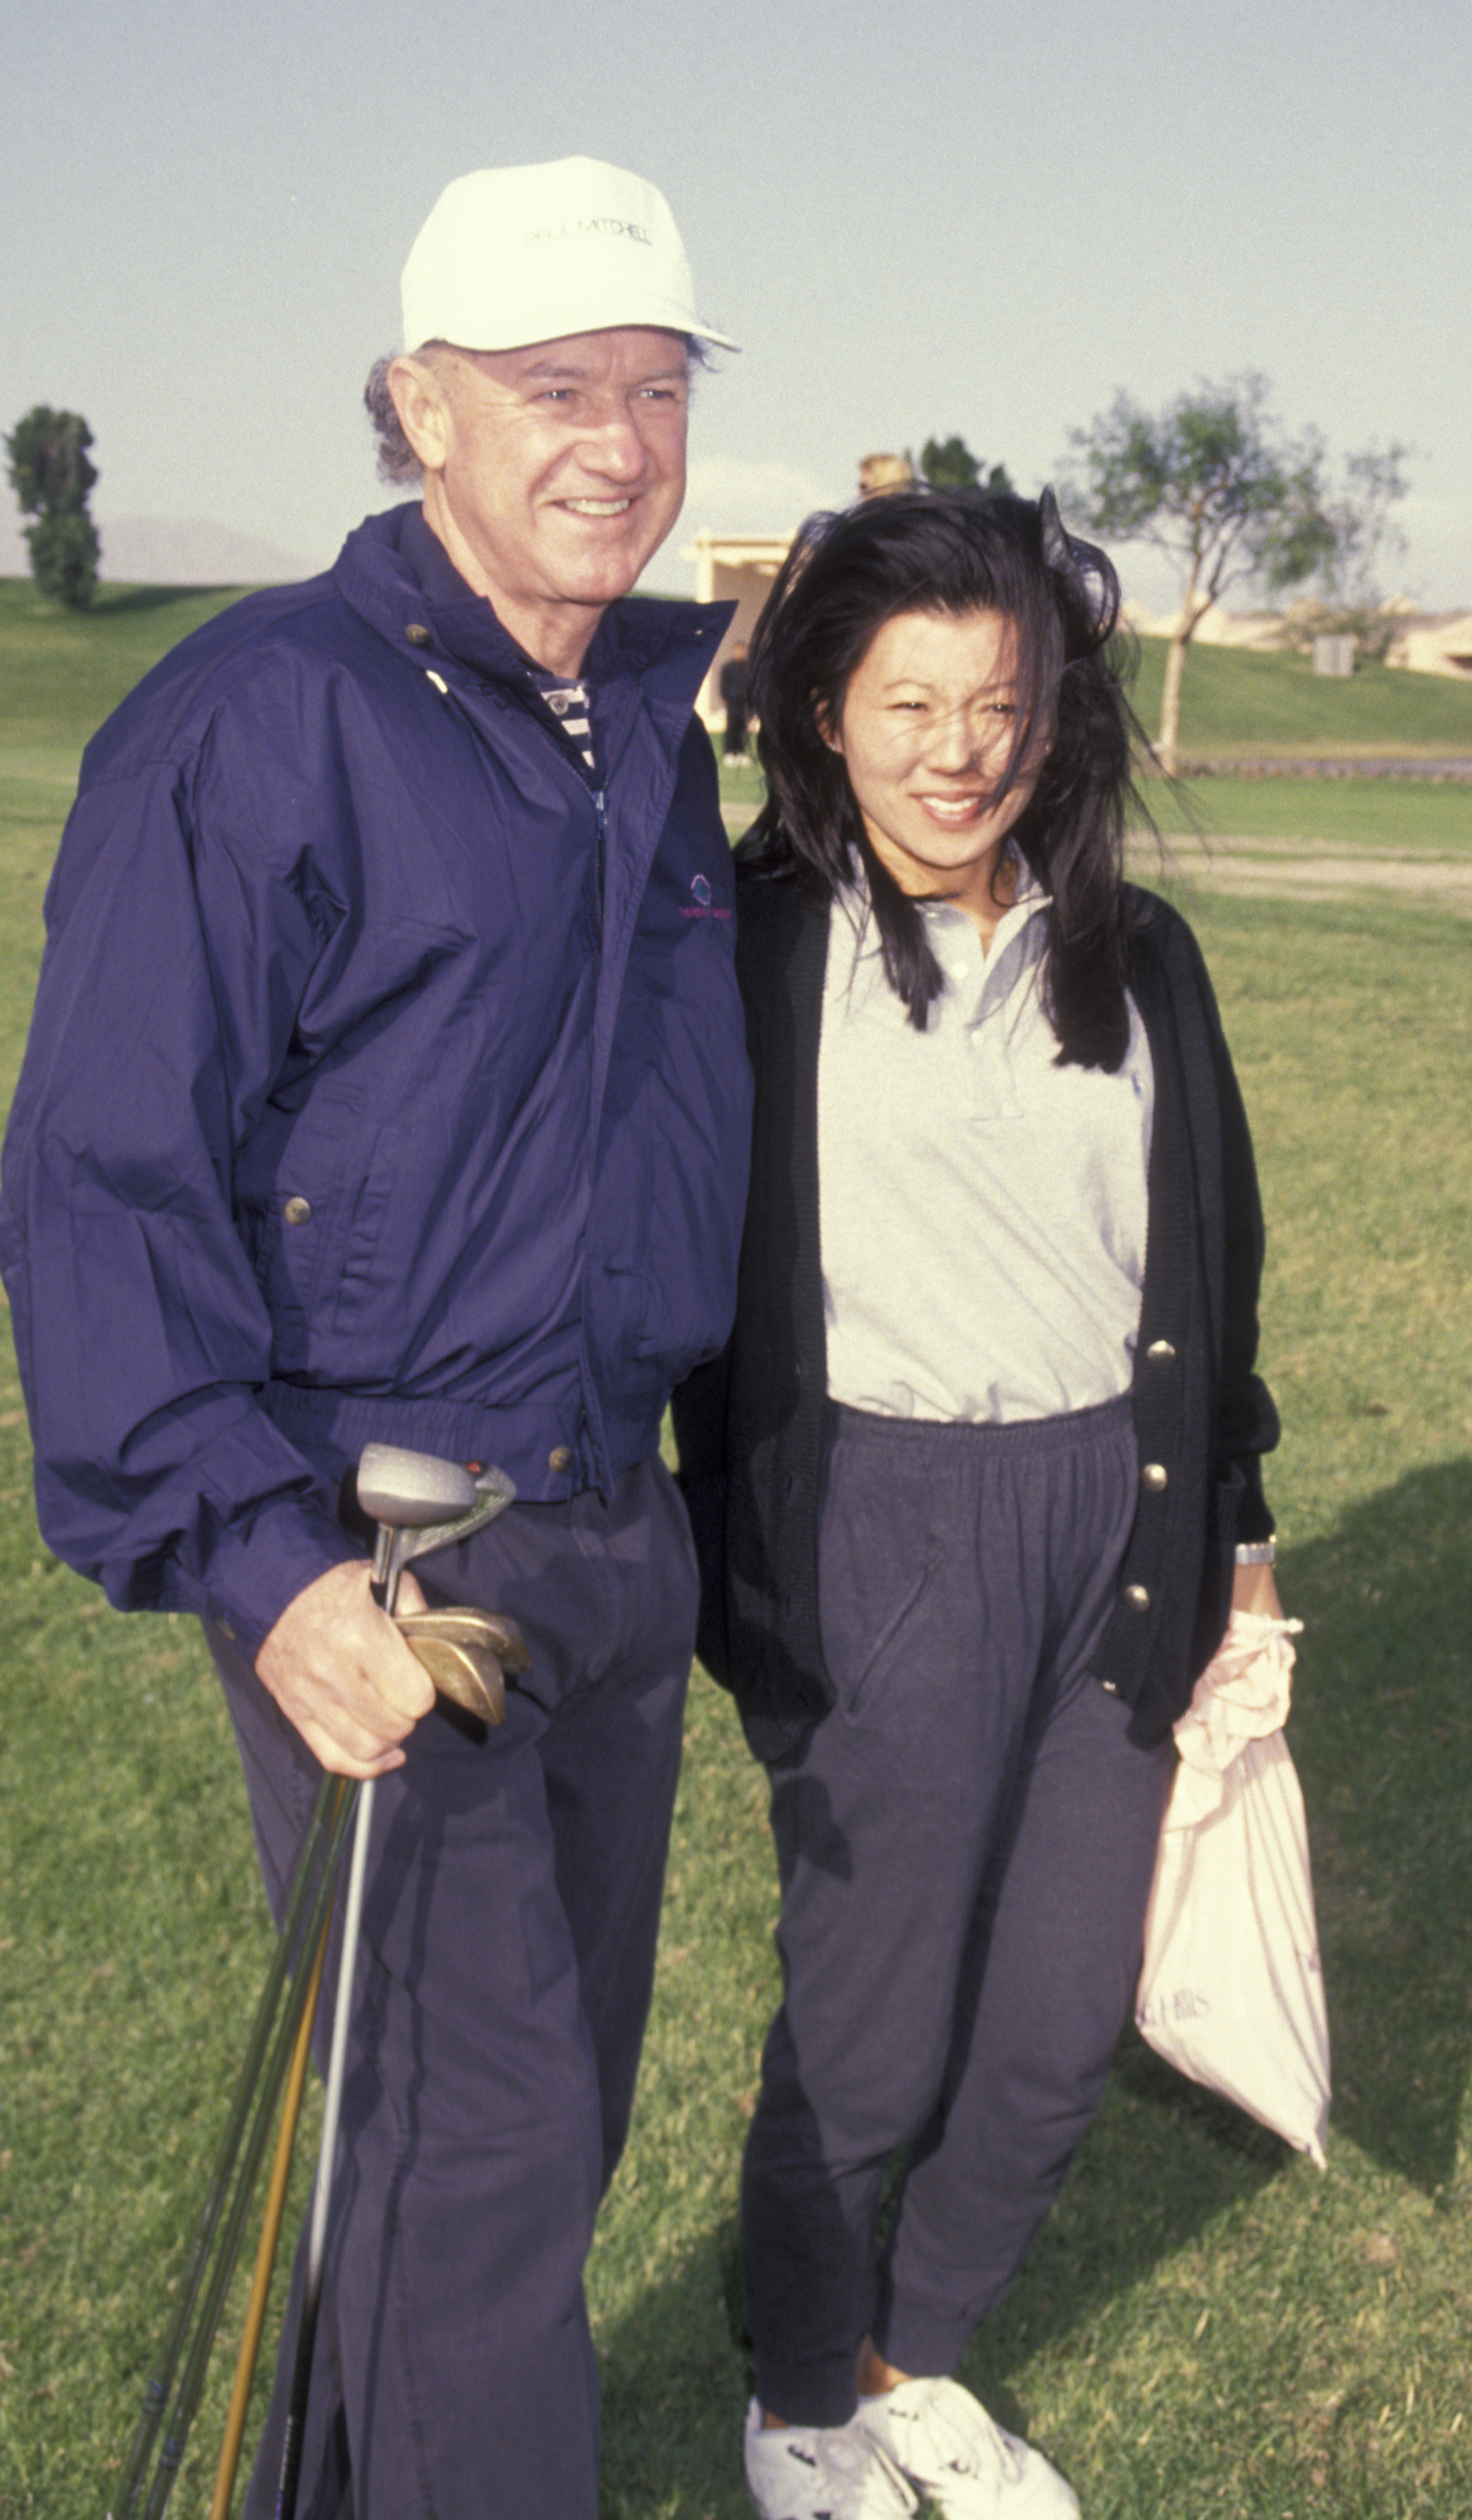 Gene Hackman and his wife Betsy Arakawa at Mission Hills Pro-Celebrity Sports Invitational on November 30, 1991, in Los Angeles, California | Source: Getty Images